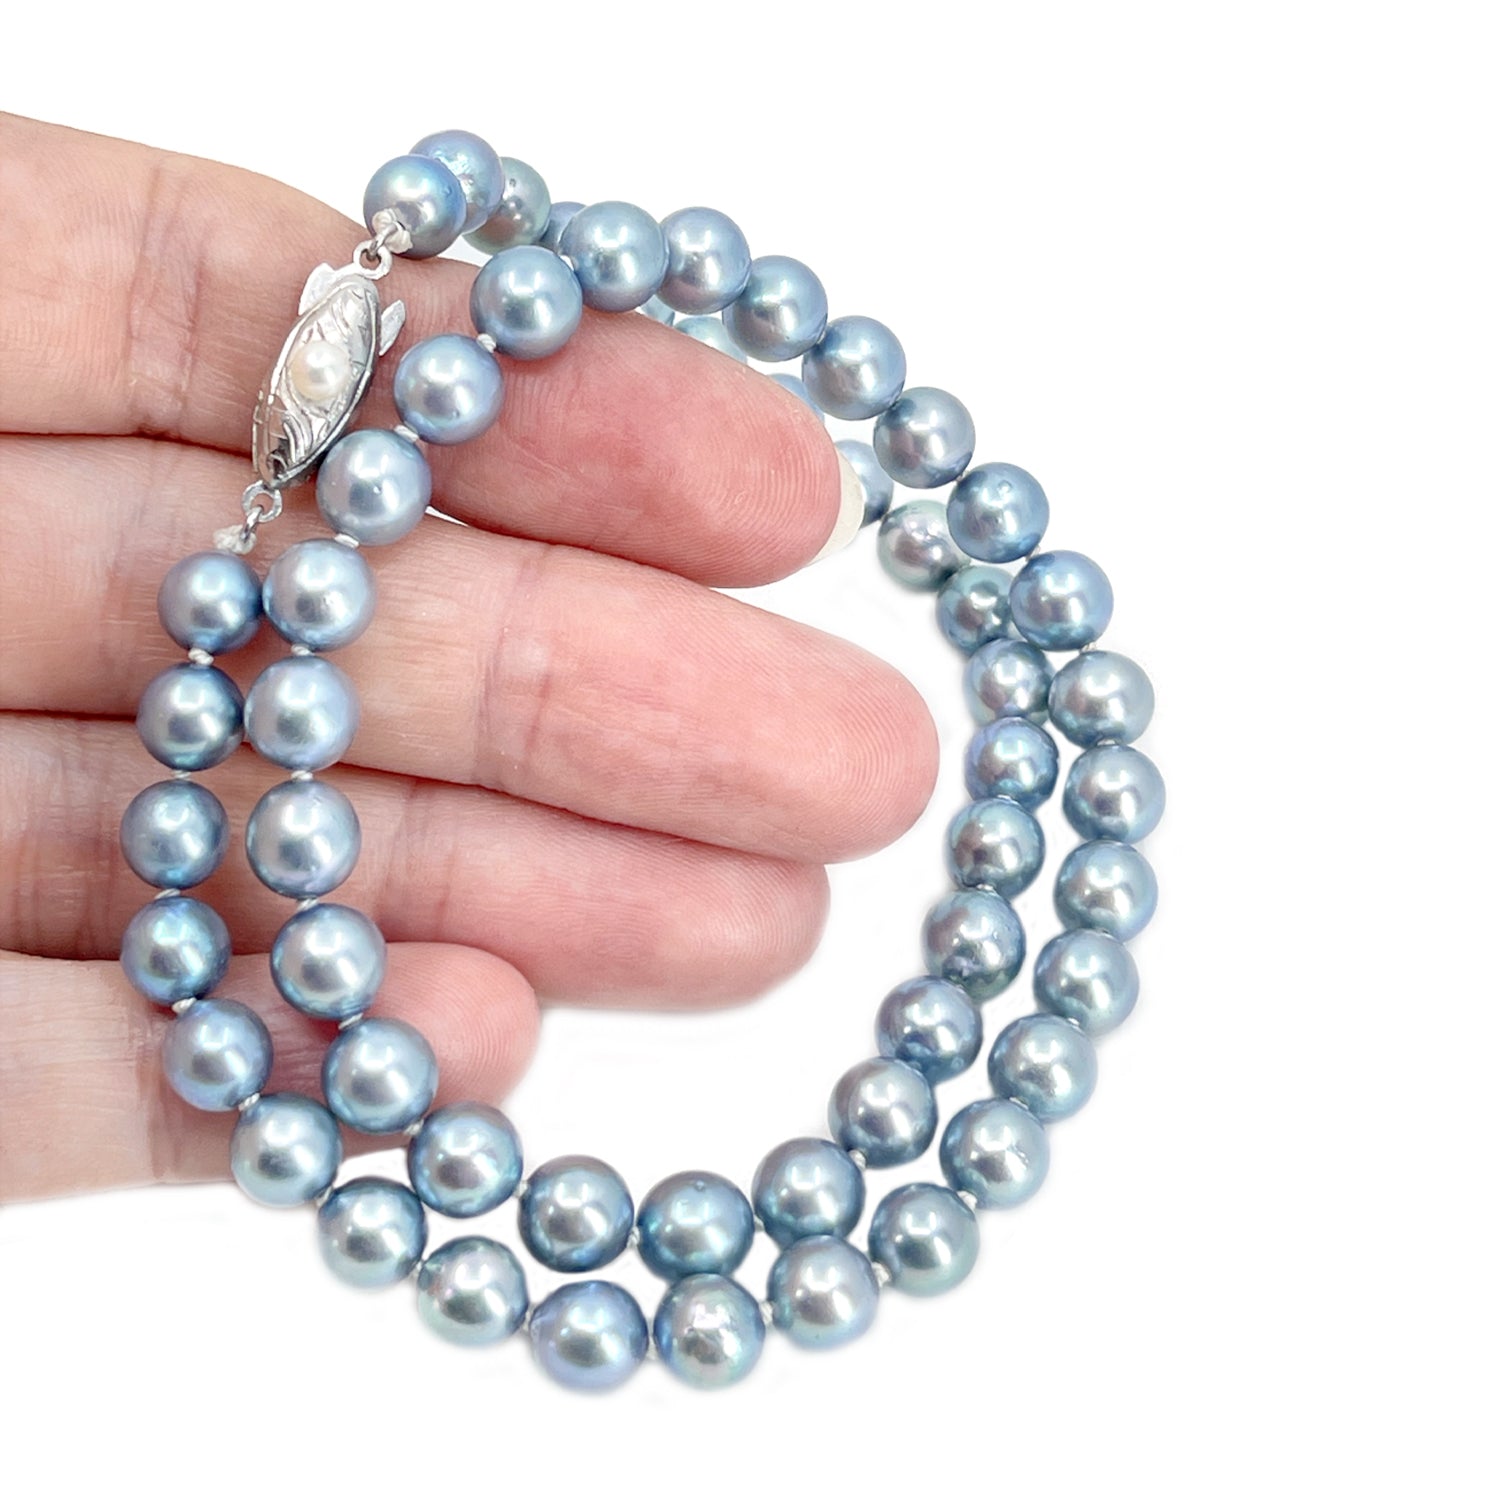 Blue Japanese Saltwater Cultured Akoya Pearl Vintage Necklace Choker - Sterling Silver 15.75 Inch